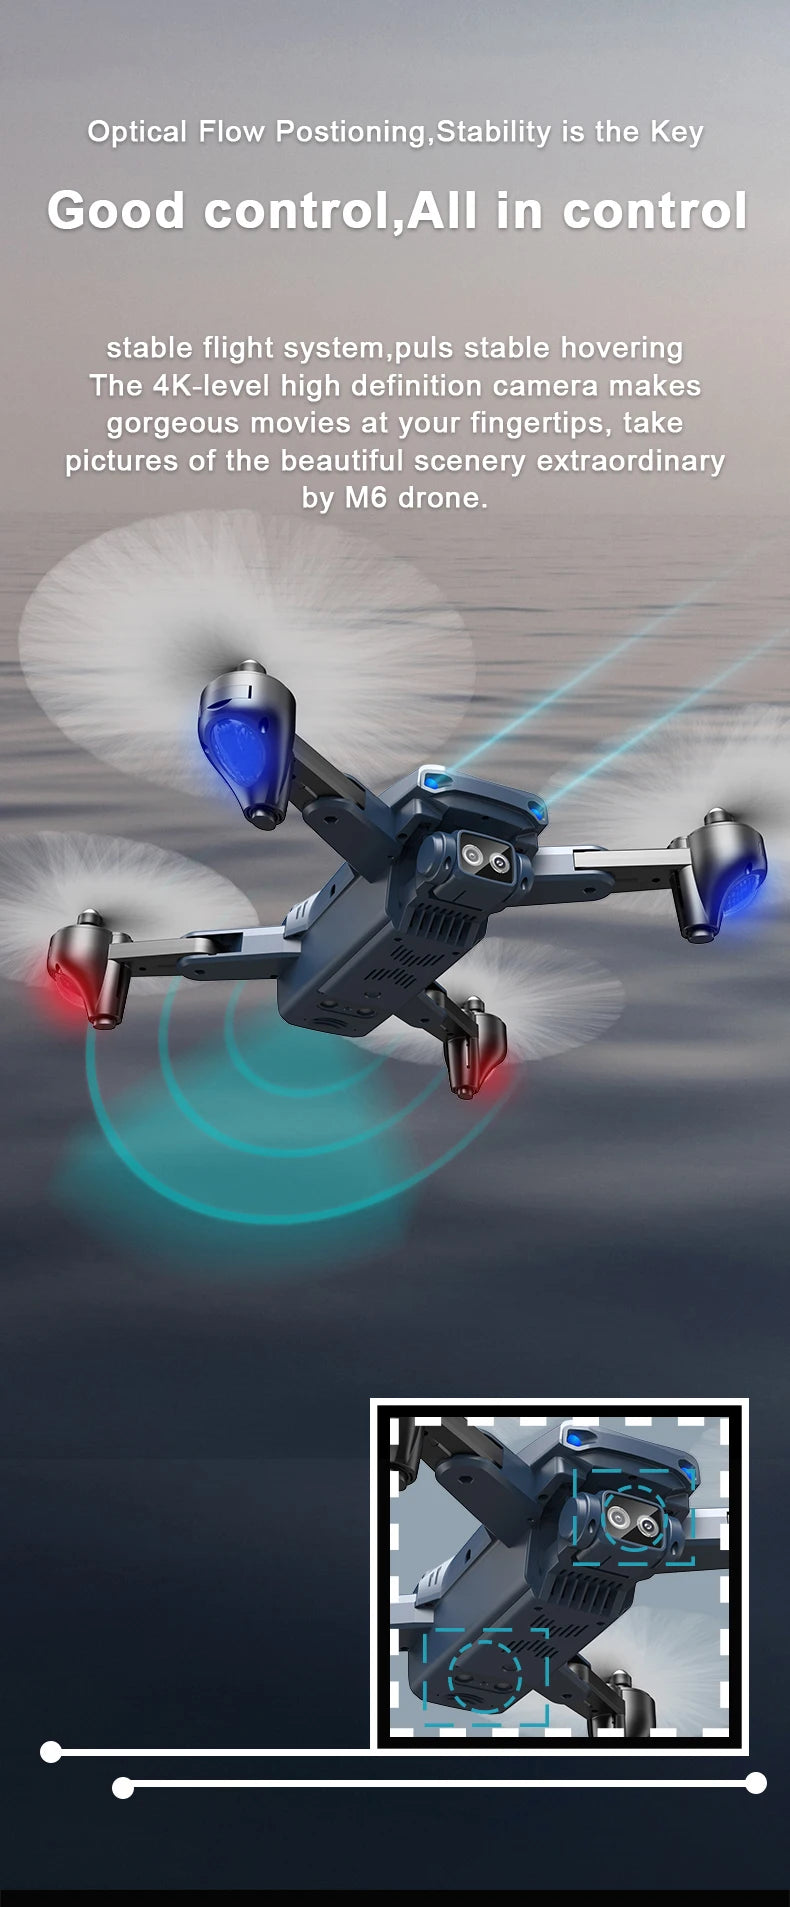 M6 Drone, m6 drone has a 4k-level high definition camera